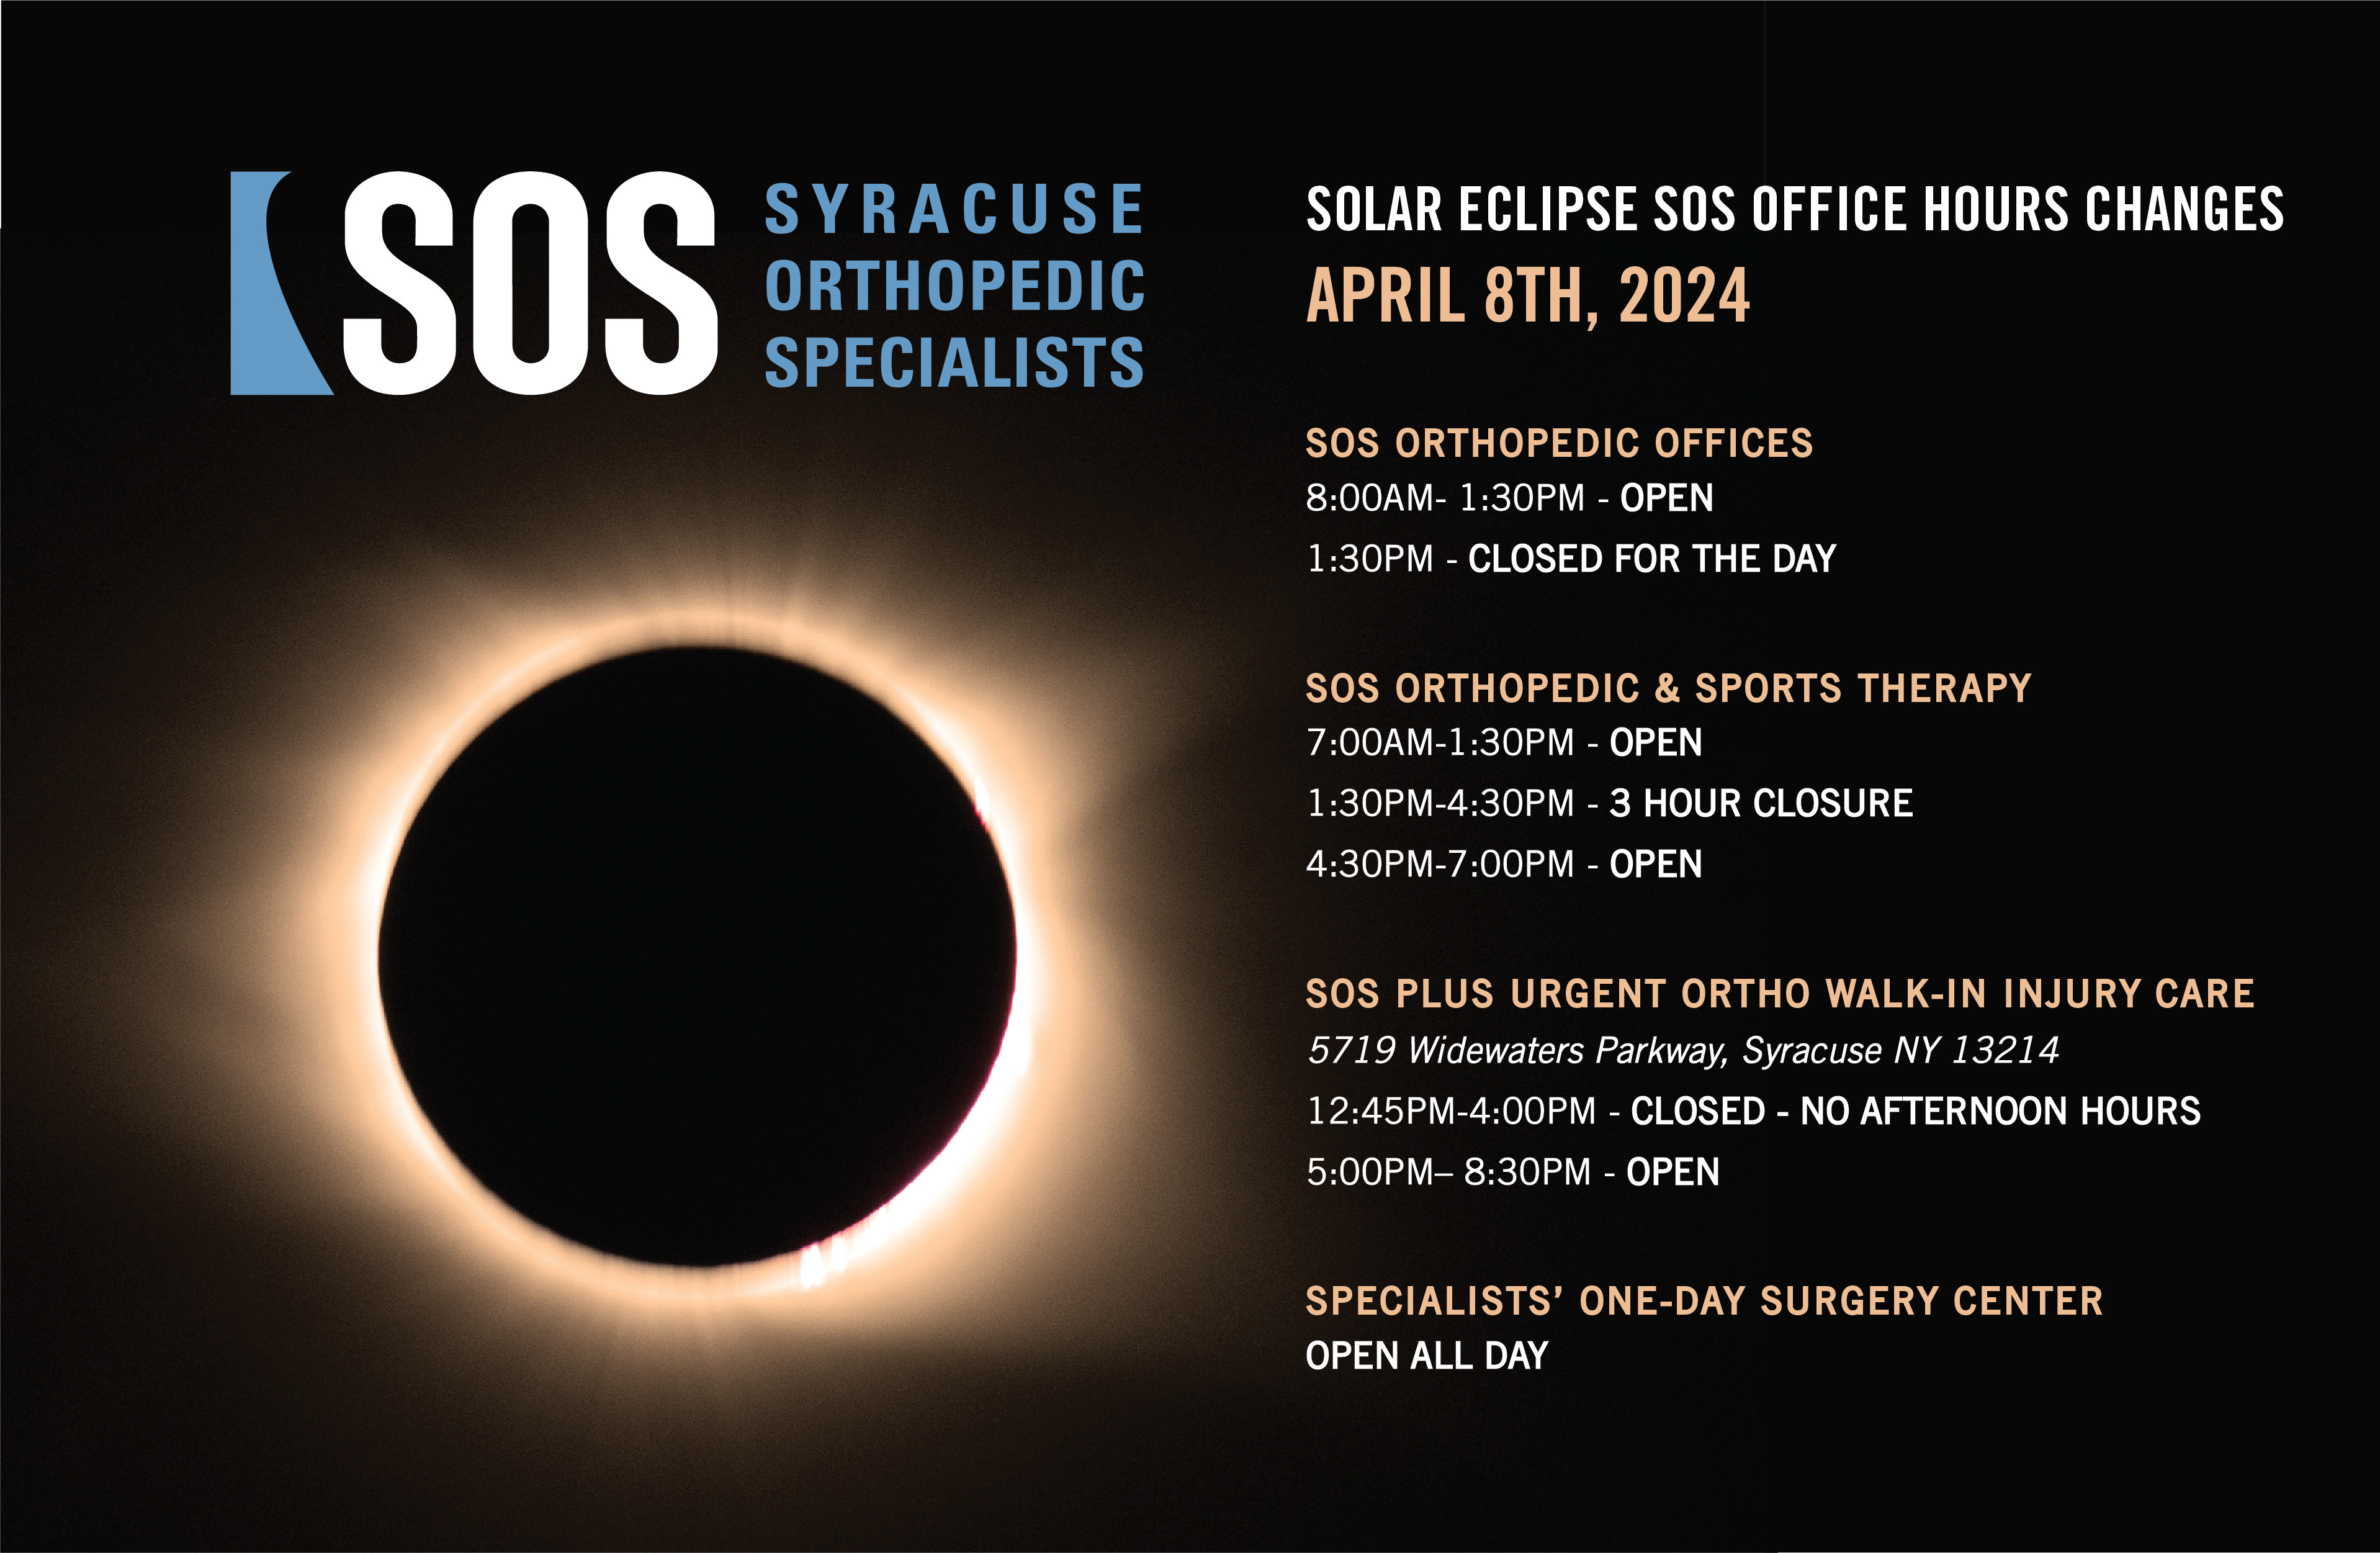 Solar Eclipse SOS Office Hour Changes